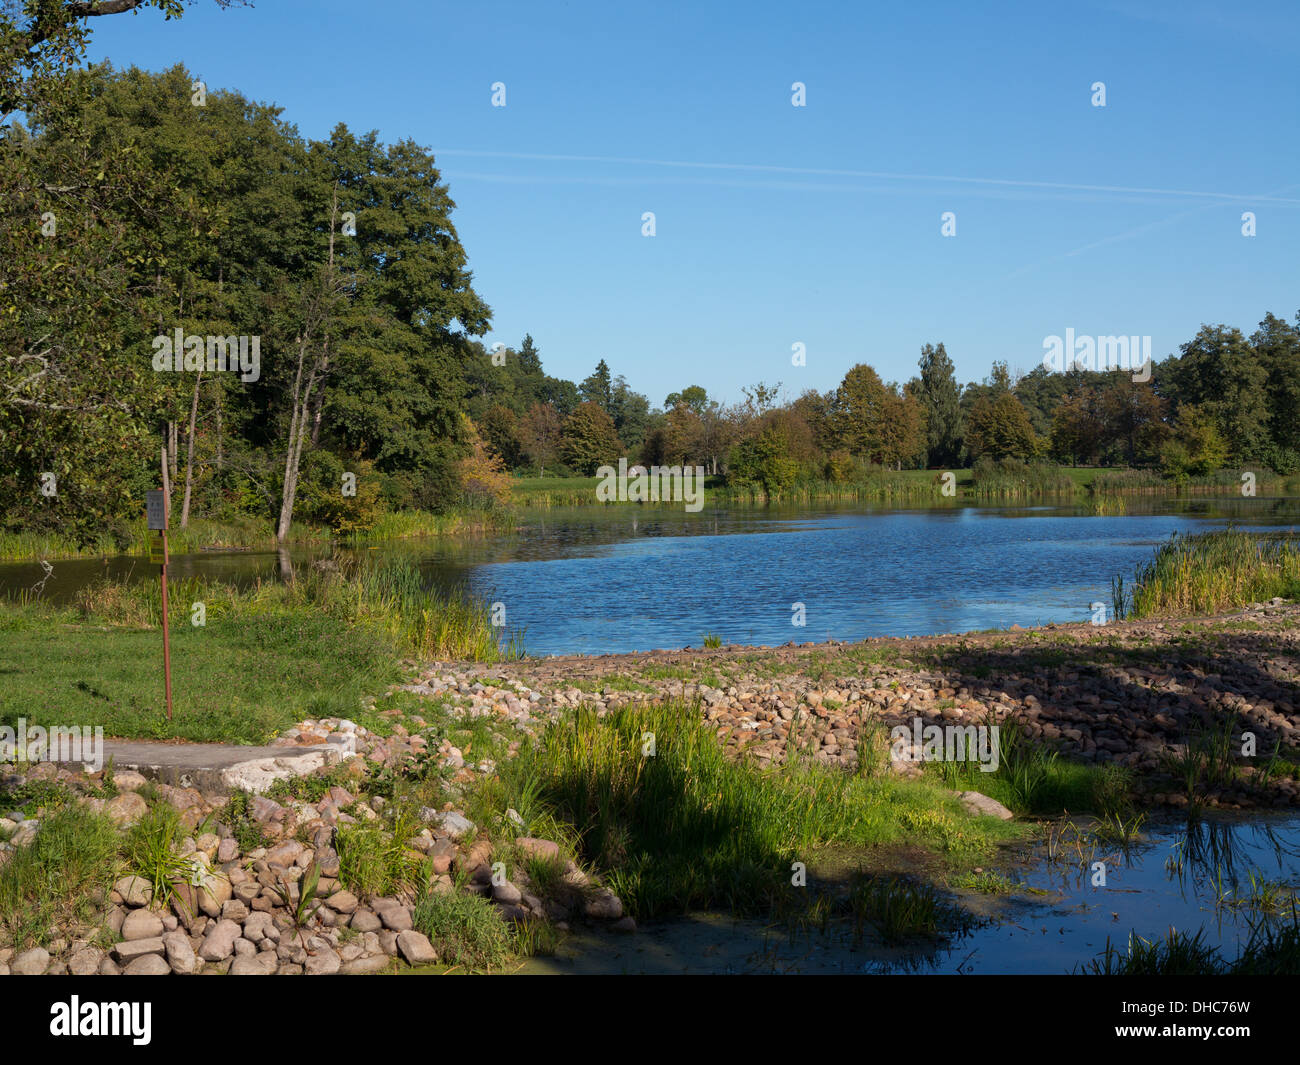 Sunny afternoon Palace Park landscape in Bialowieza with pond Stock Photo